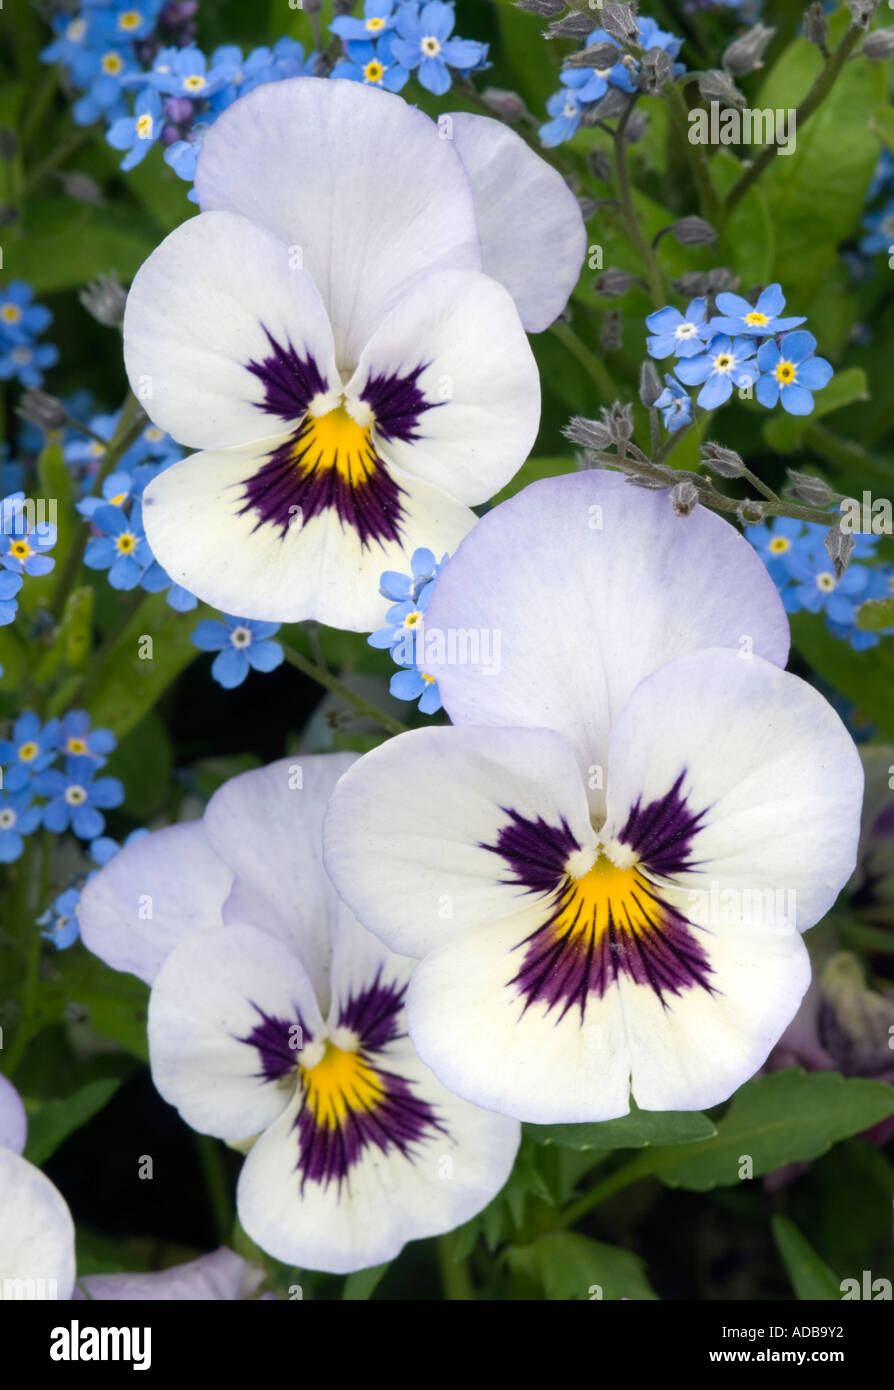 Pansies and Forget-me-nots Stock Photo